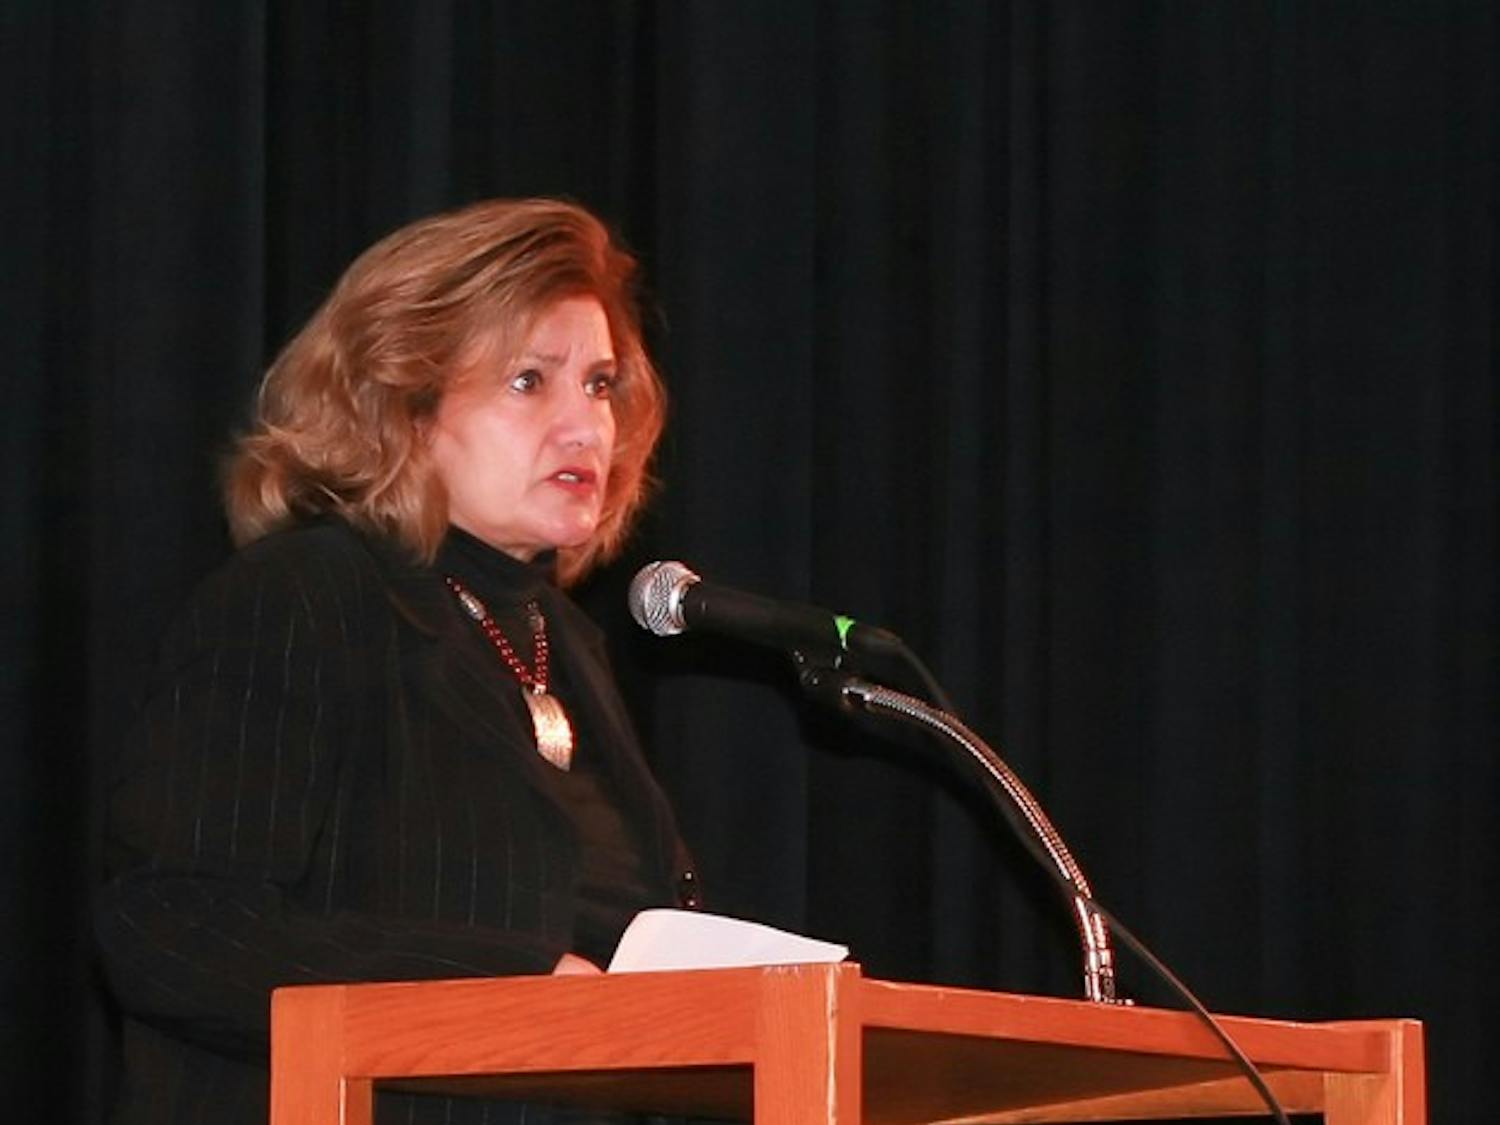 Nonie Darwish, a former Muslim and Christian convert, discussed her critical view of radical Islam to a crowded, and at points irate, audience Wednesday evening in Collis Common Ground.